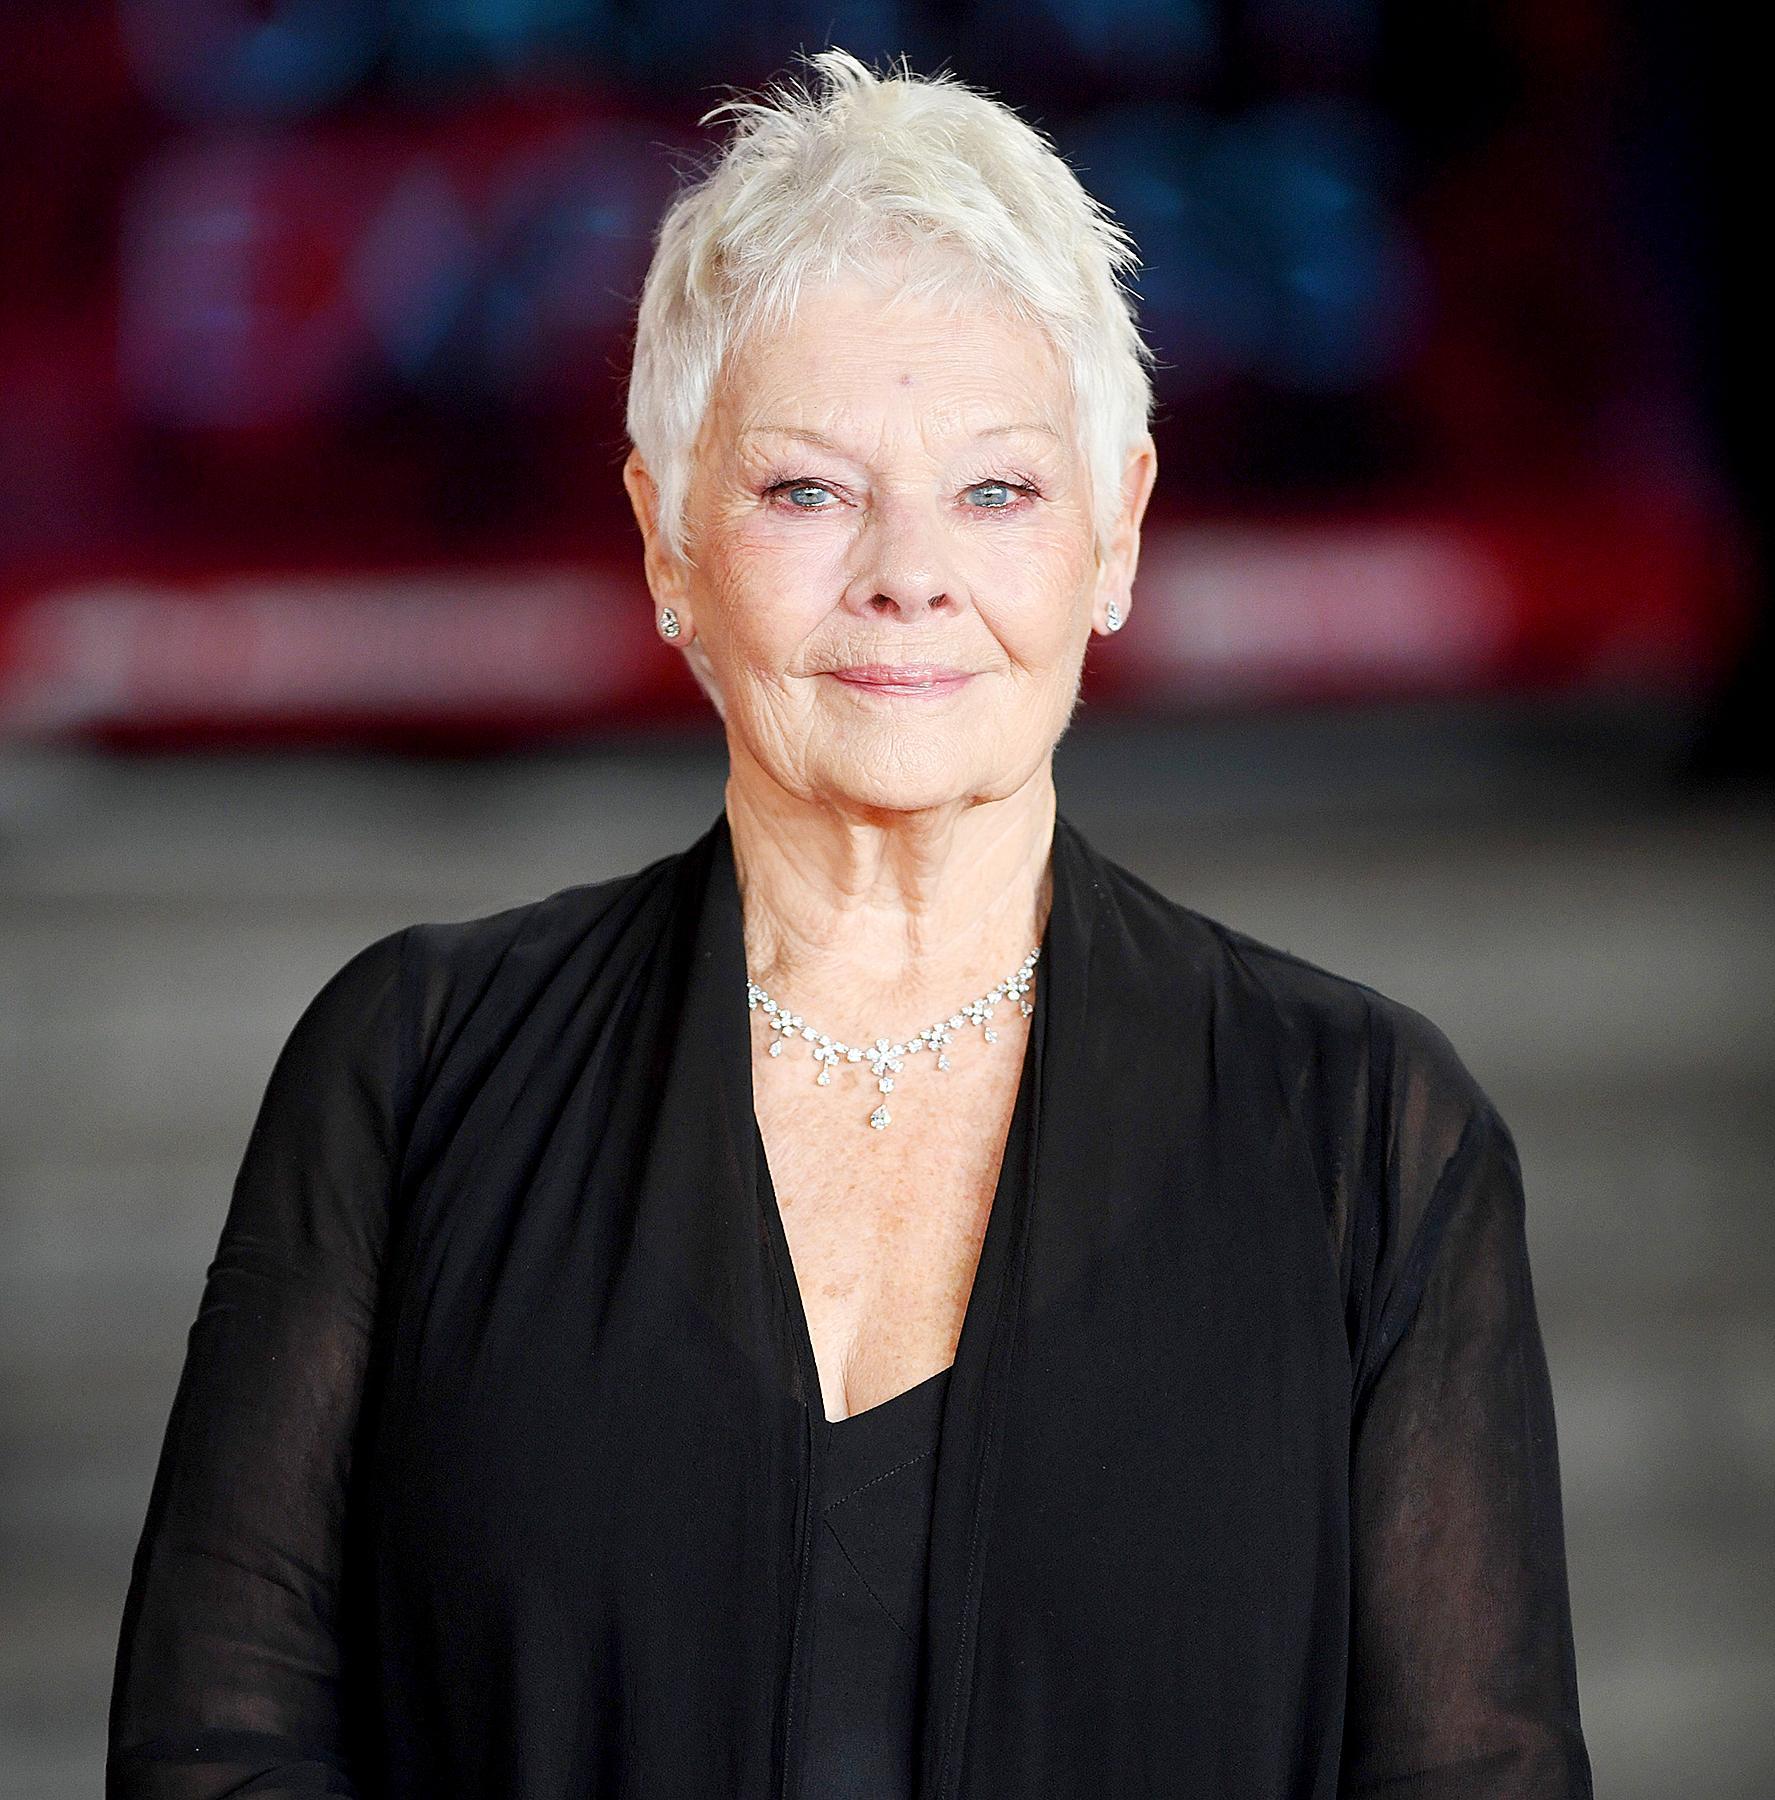 SAG Awards 2018: Twitter Reacts to Judi Dench 'Leading Roll' Typo